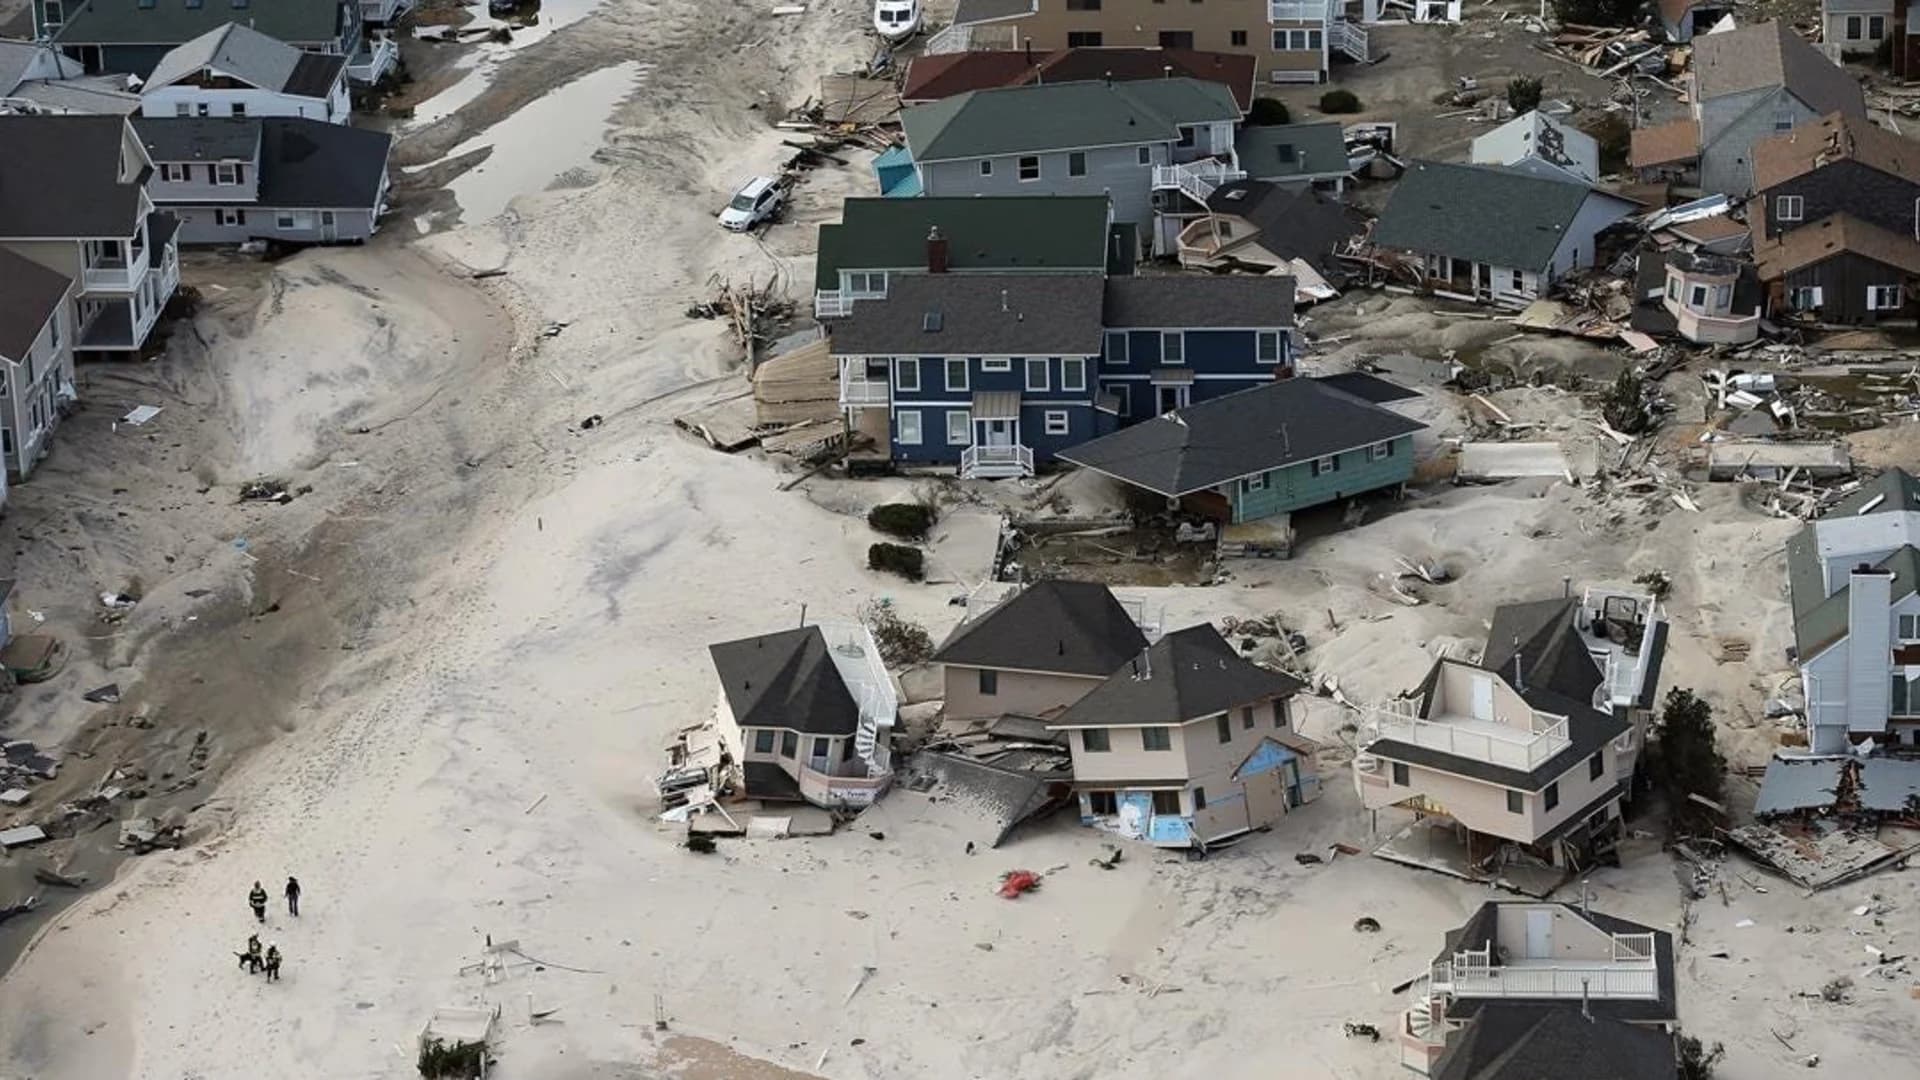 Looking back on Superstorm Sandy's destruction across the tri-state